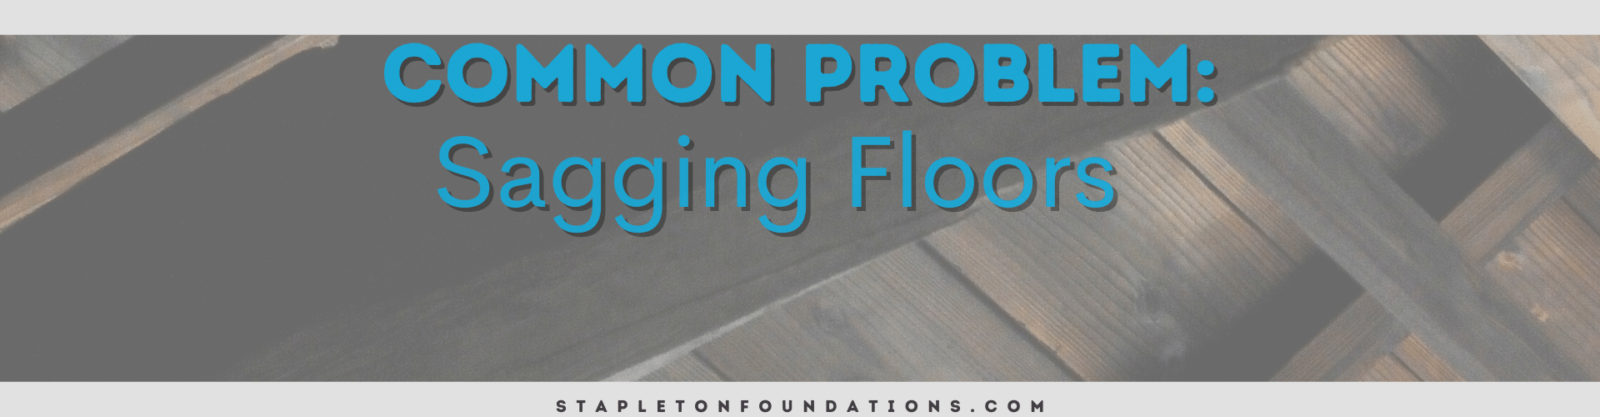 Sagging floors are a common problem related to a crawlspace